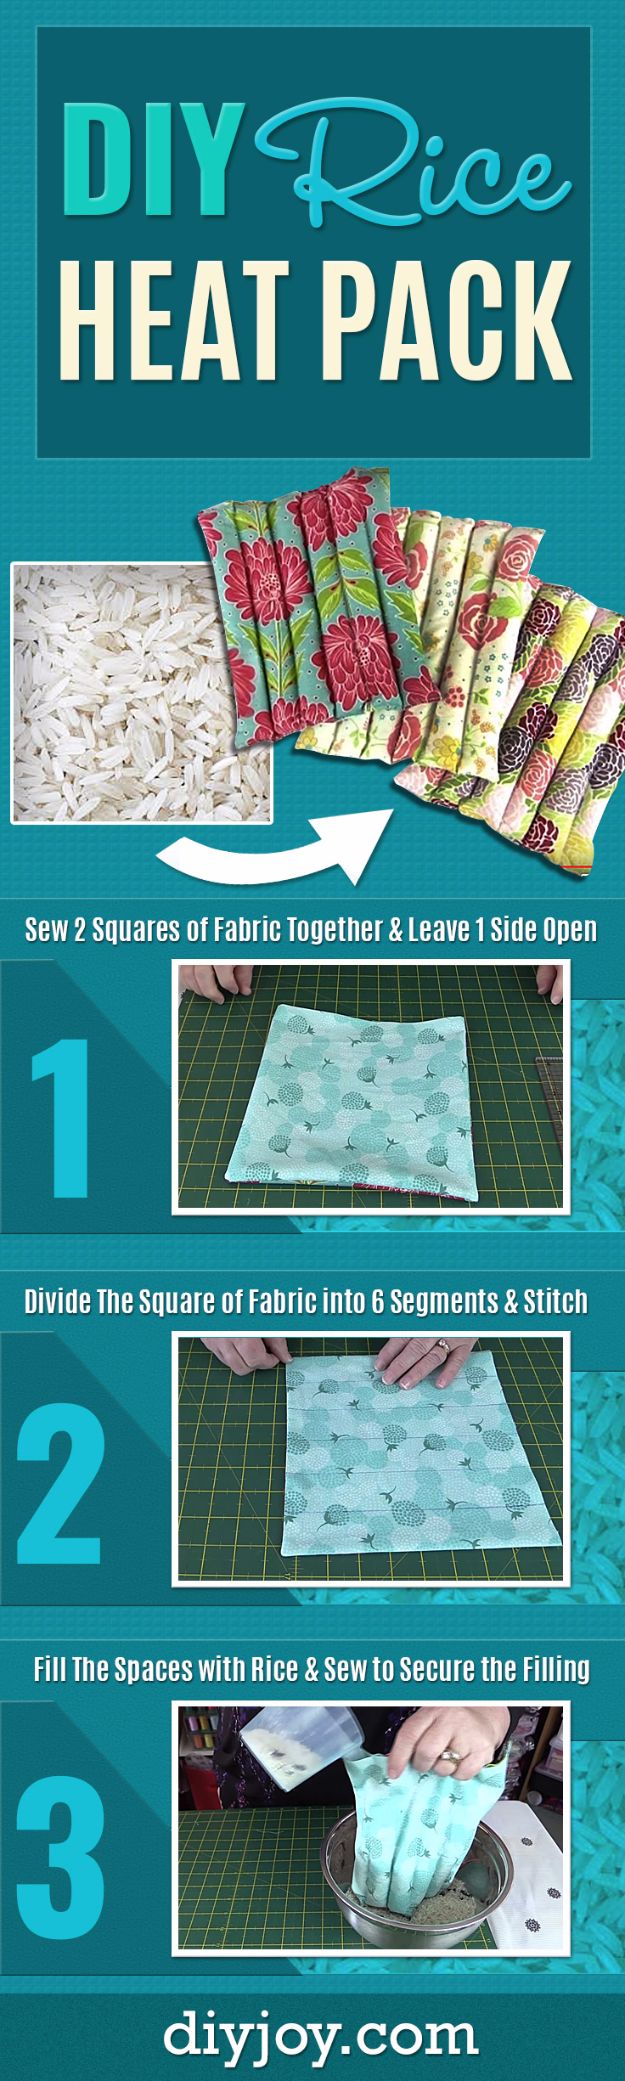 Cheap Crafts for Teens - DIY Rice Heat Pack - Inexpensive DIY Projects for Teenagers and Tweens - Cute Room Decor, School Supplies, Accessories and Clothing You Can Make On A Budget - Fun Dollar Store Crafts - Cool DIY Gift Ideas for Christmas, Birthdays, BFF gifts and more - Step by Step Tutorials and Instructions #cheapcrafts #dollarstorecrafts #teencrafts #dollartreecrafts